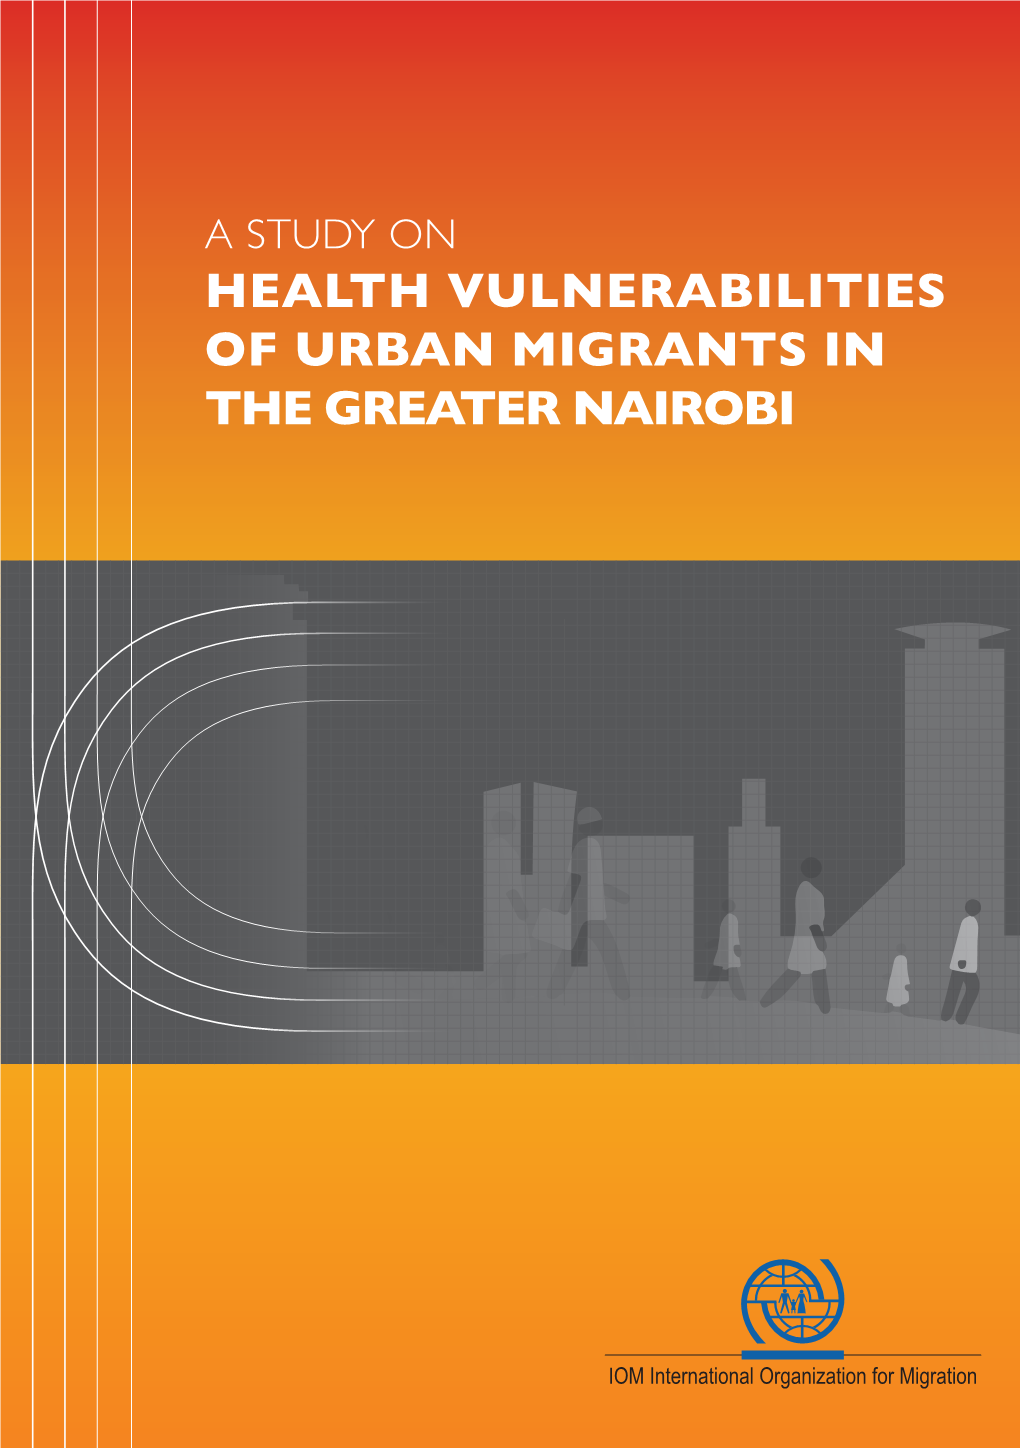 A STUDY on HEALTH VULNERABILITIES of URBAN MIGRANTS in the GREATER NAIROBI International Organization for Migration (IOM)